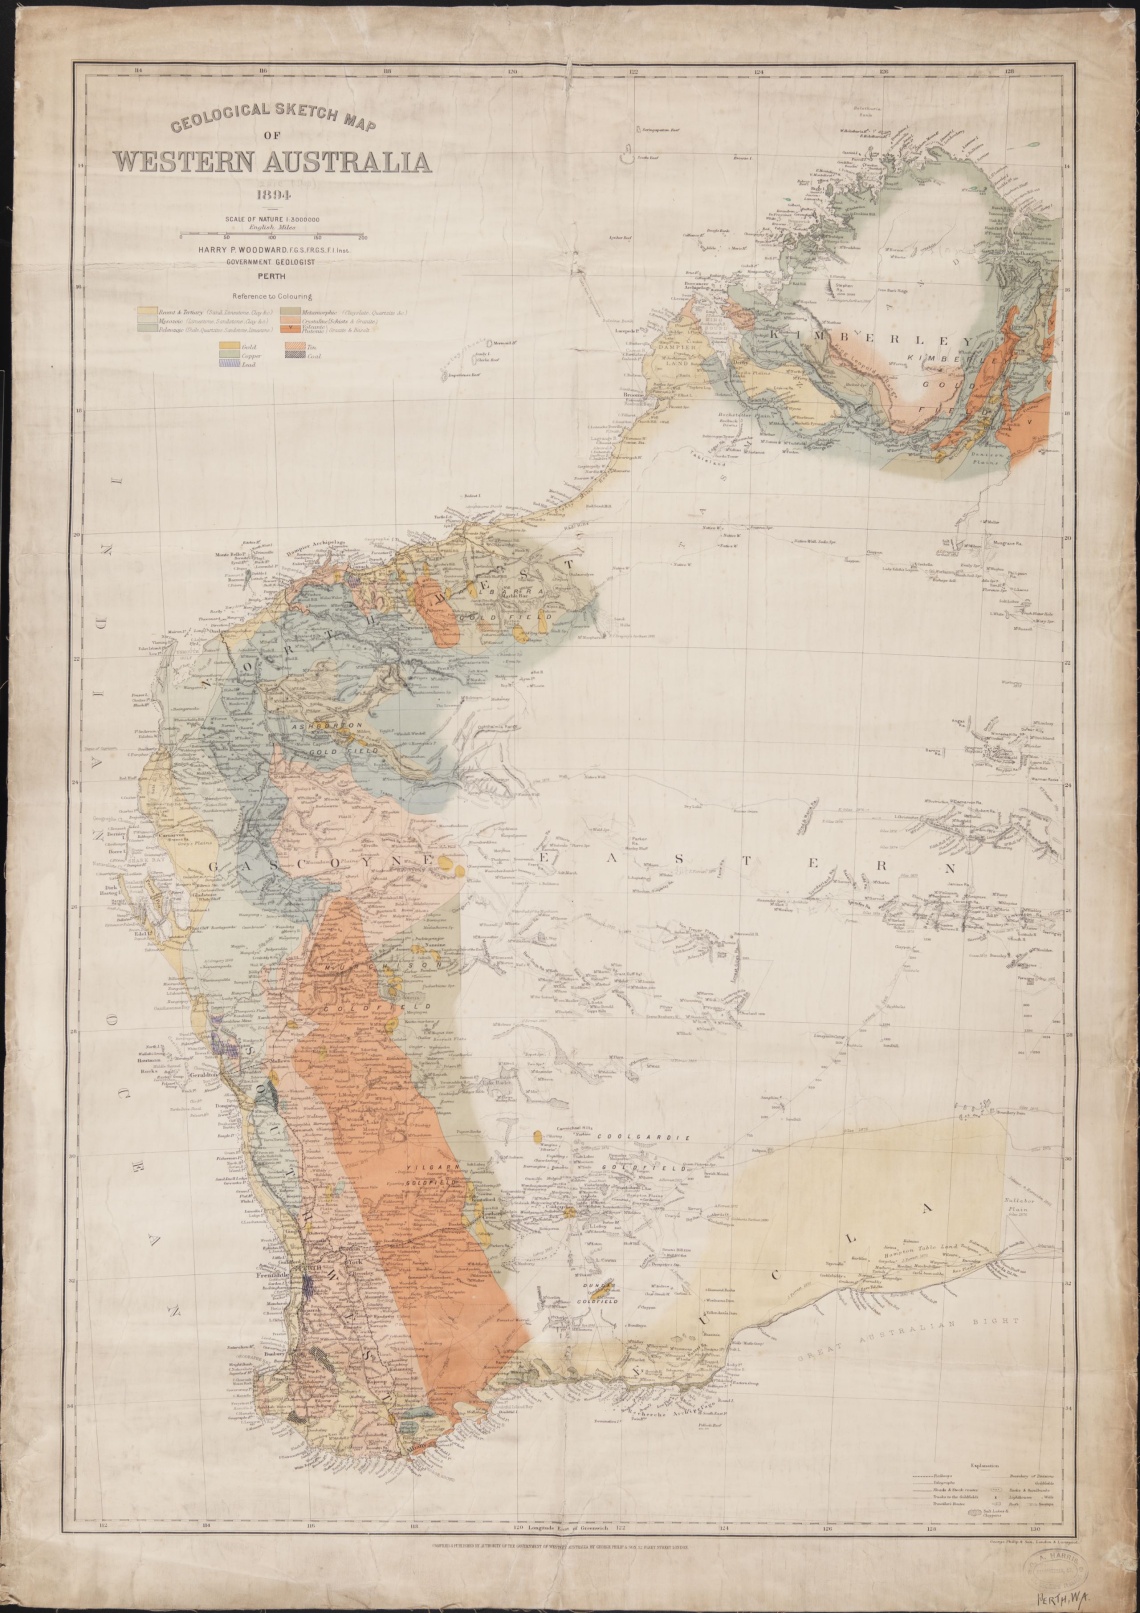 Geological sketch map of Western Australia published by George Philip and Son 1894 